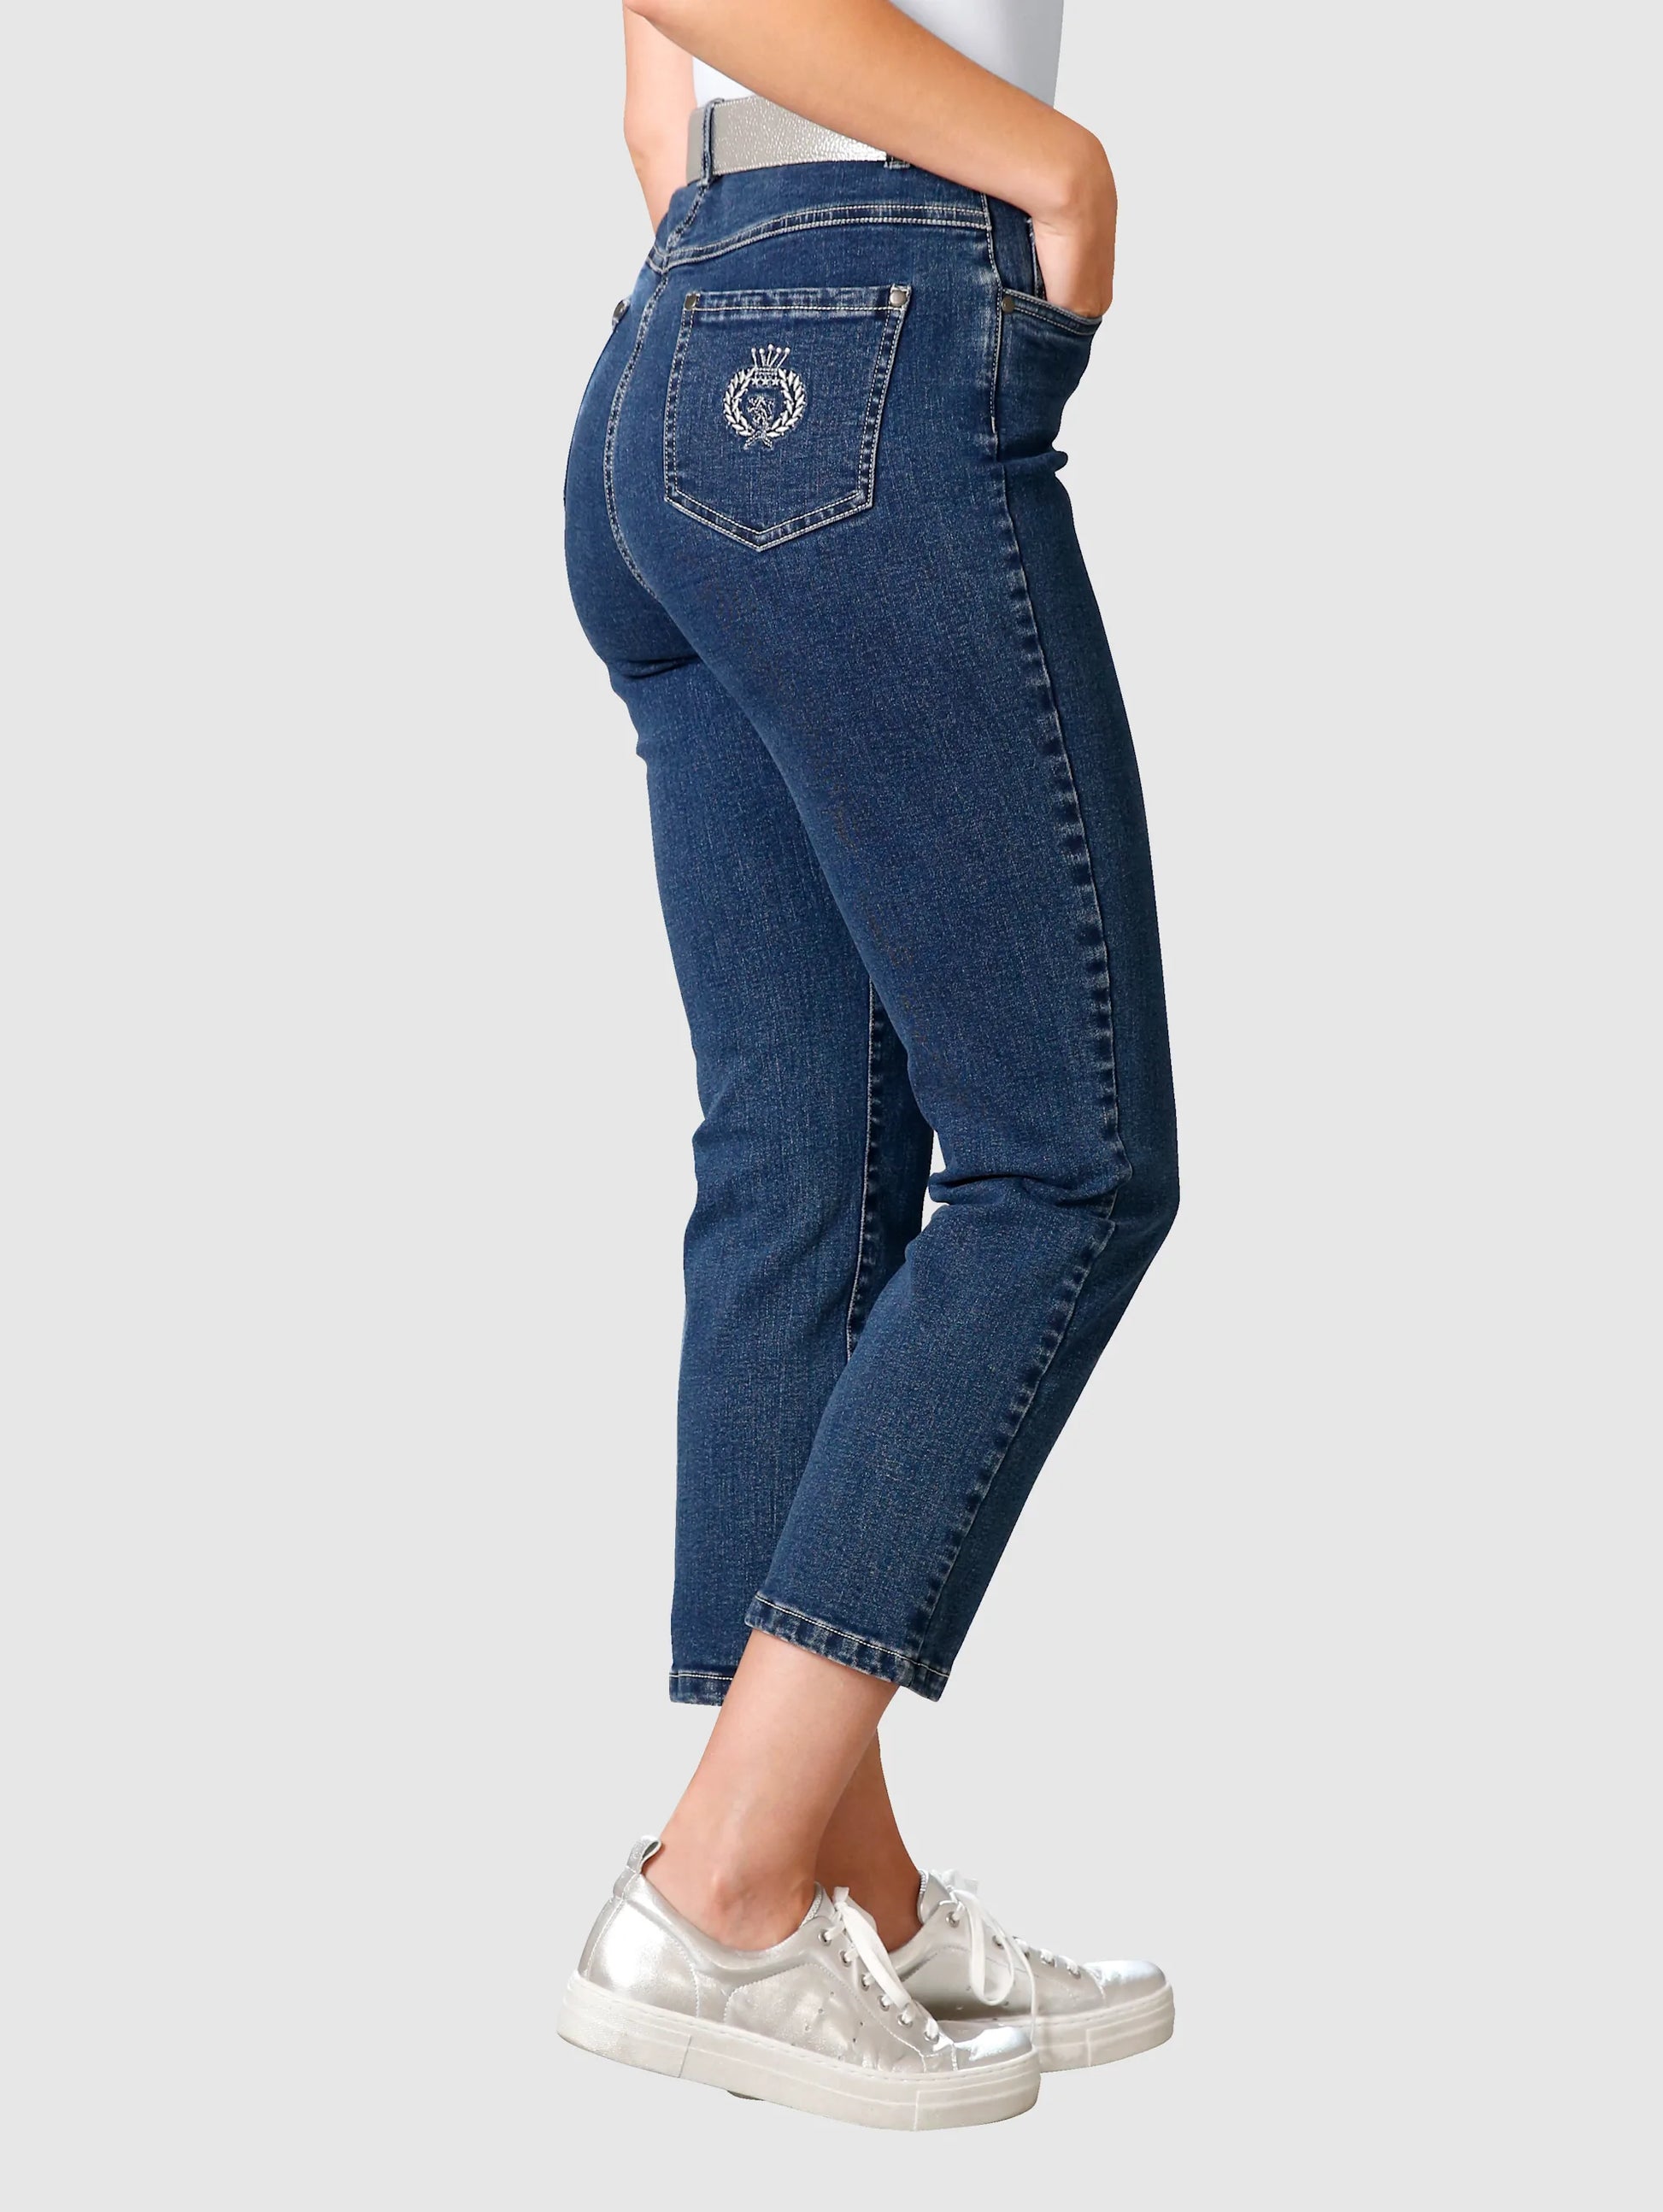 Nifty Stretchable Ladies Denim Designed Capris at Rs 425/piece in